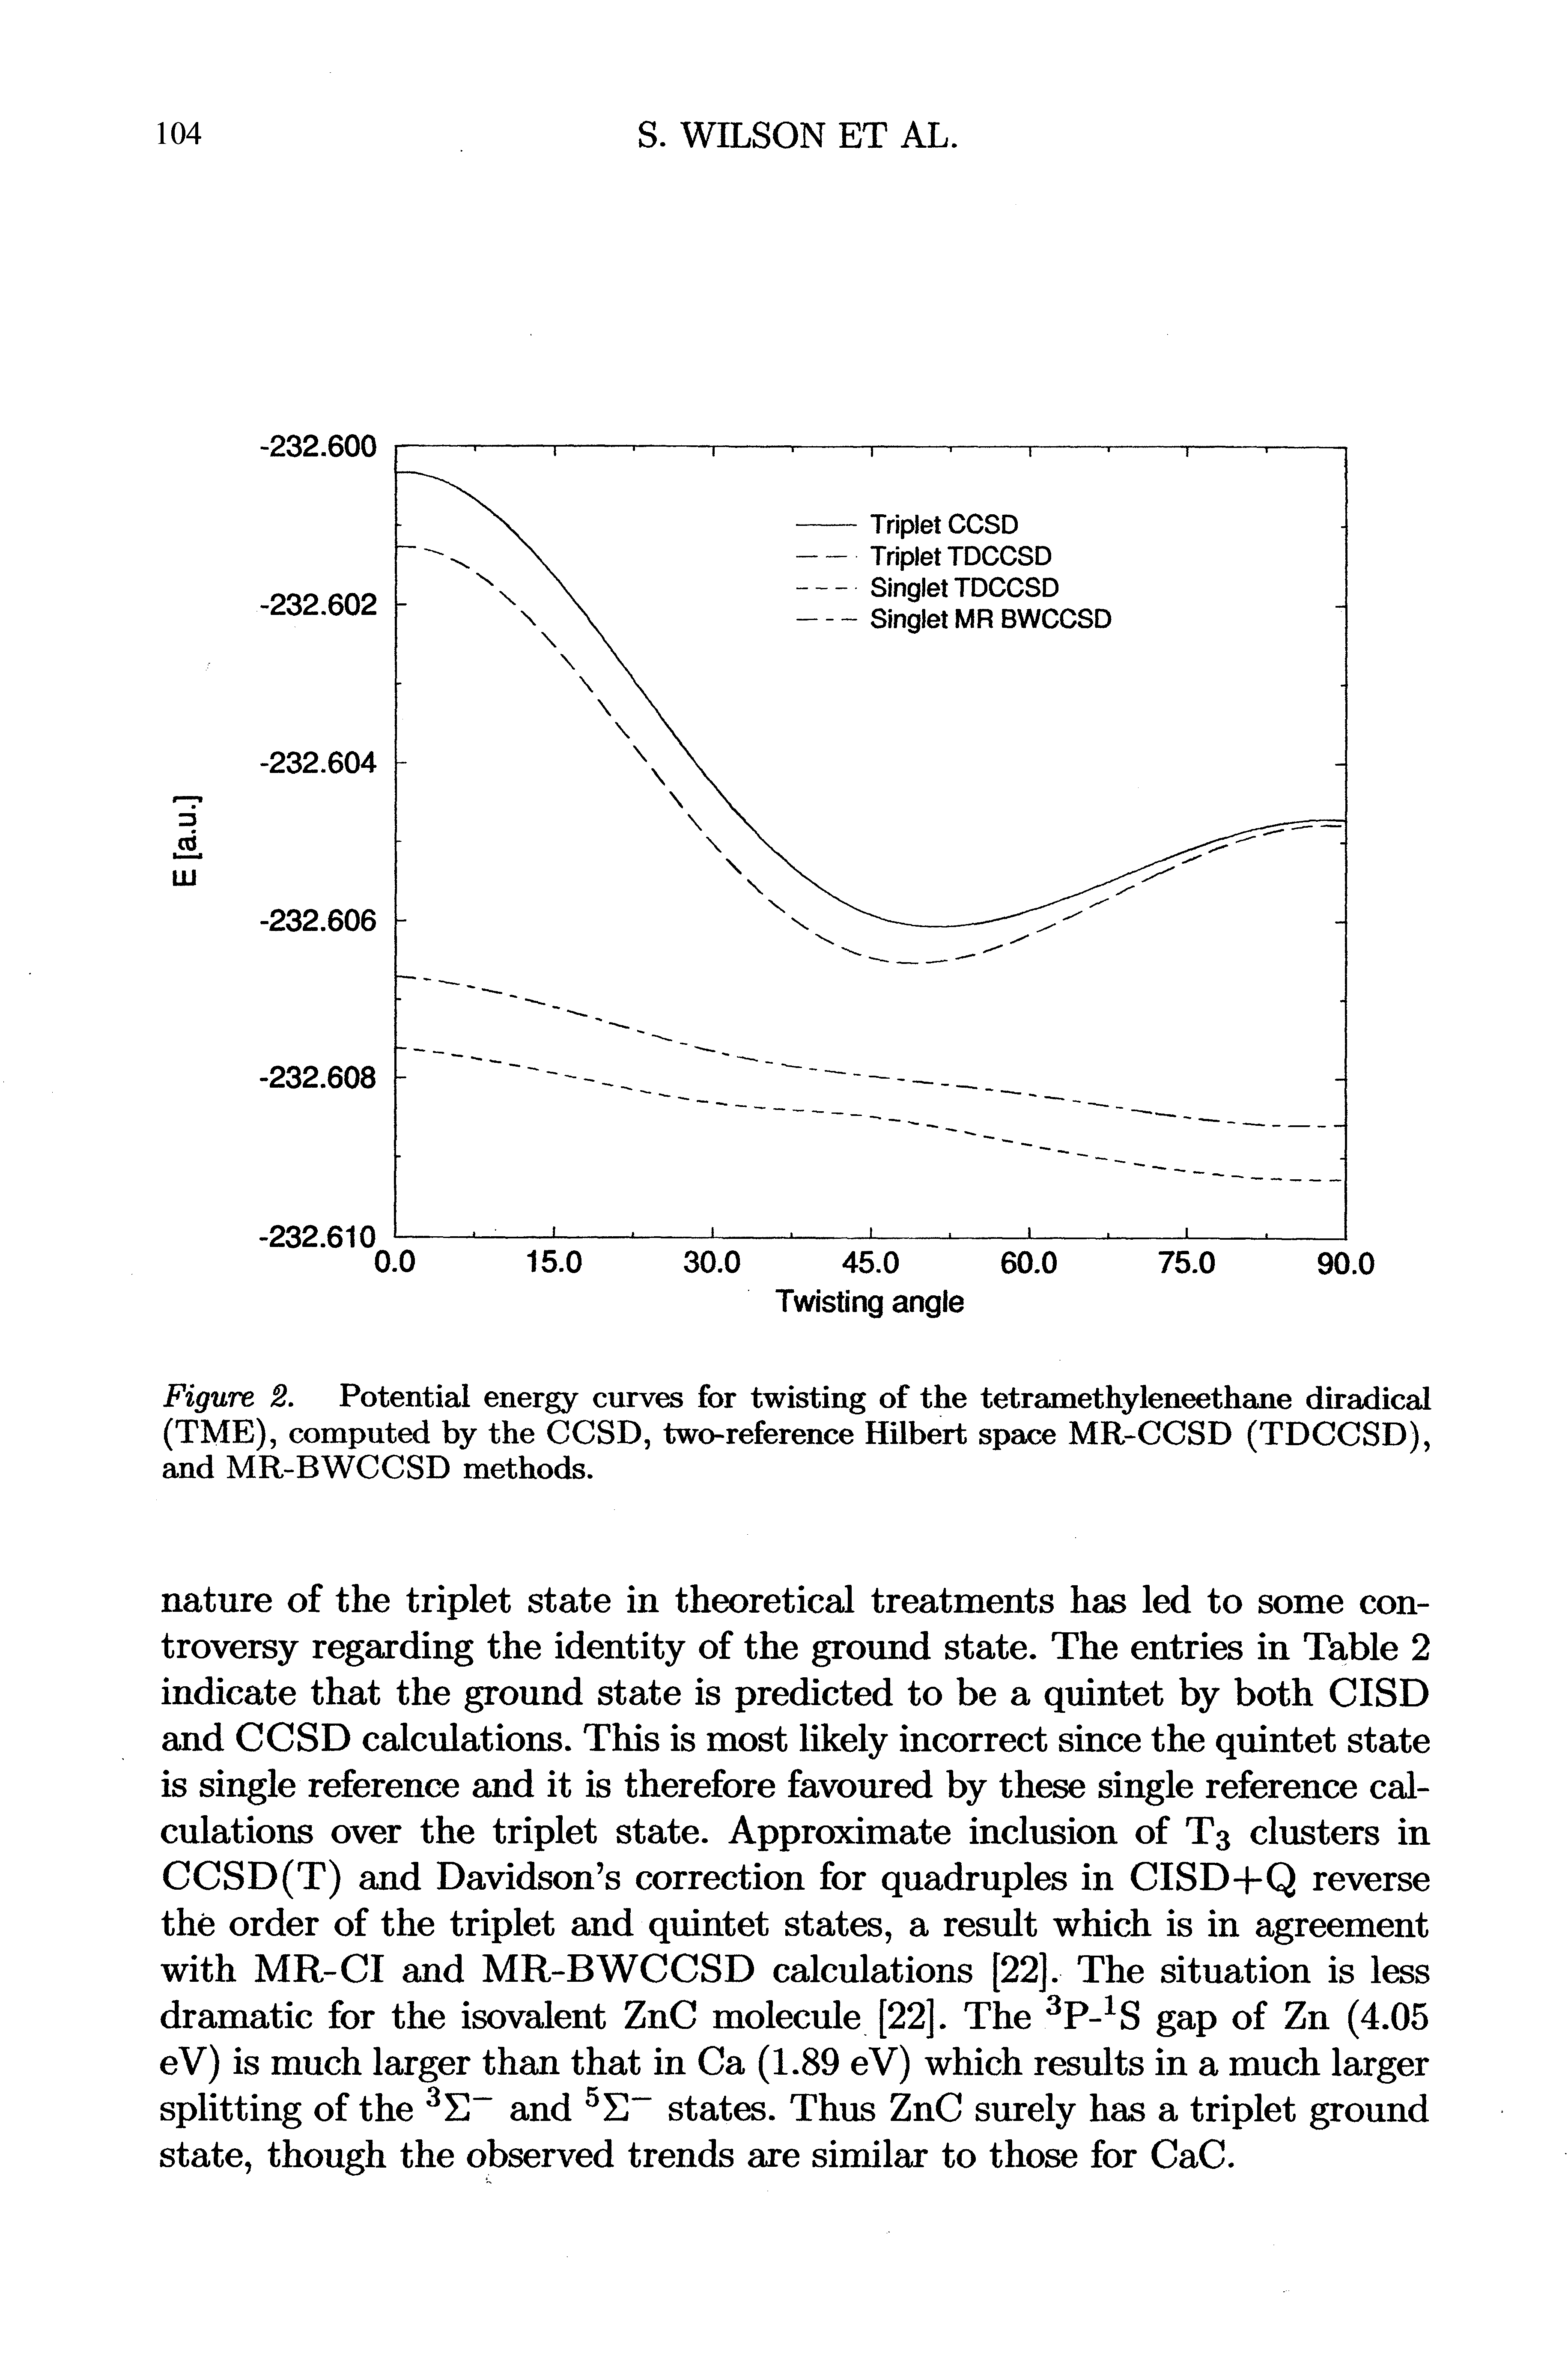 Figure 2. Potential energy curves for twisting of the tetramethyleneethane diradical (TME), computed by the CCSD, two-reference Hilbert space MR-CCSD (TDCCSD), and MR-BWCCSD methods.